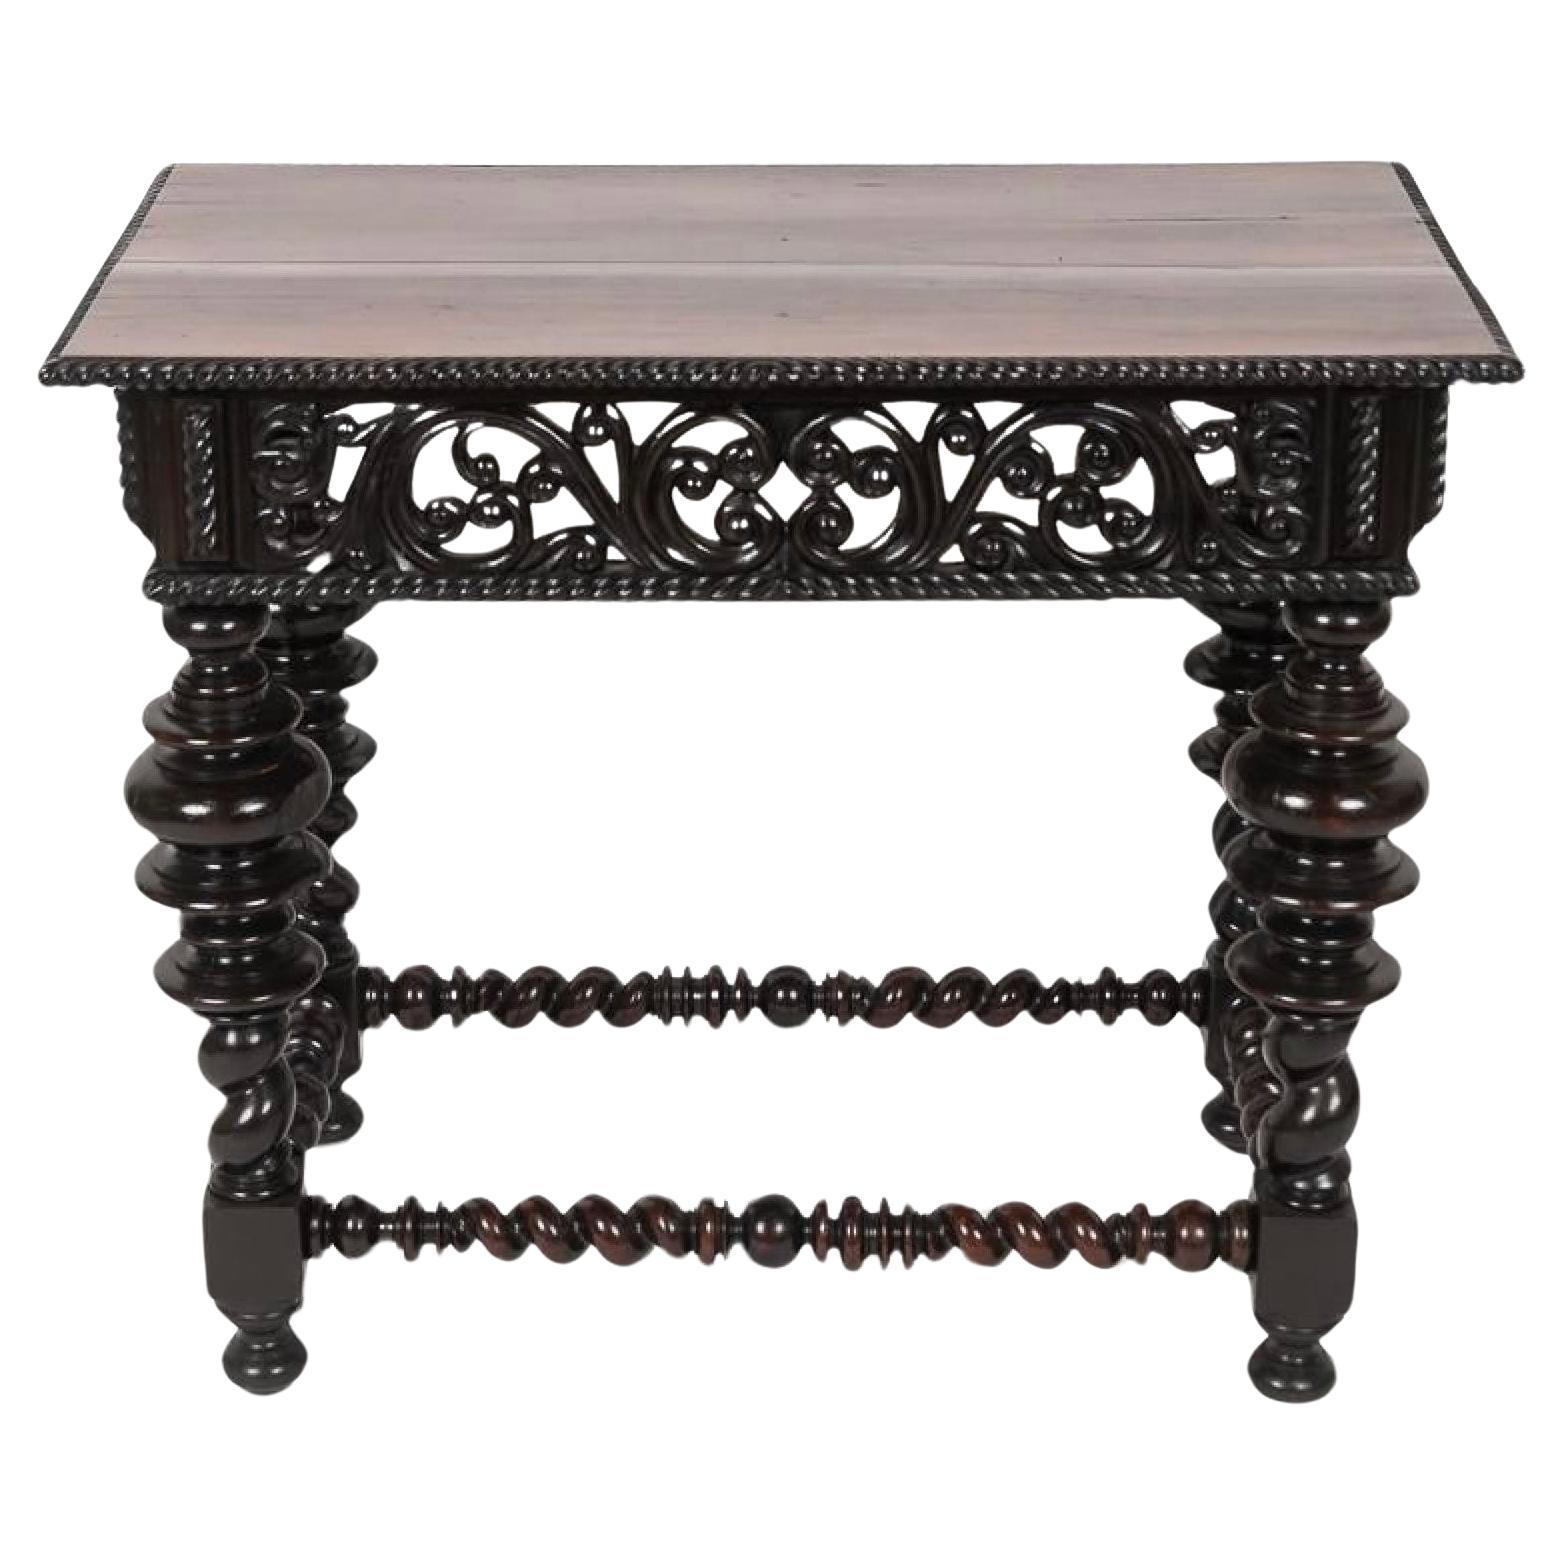 Antique Portuguese Carved Rosewood Side Table With Bulbous Turnings Early 19th C